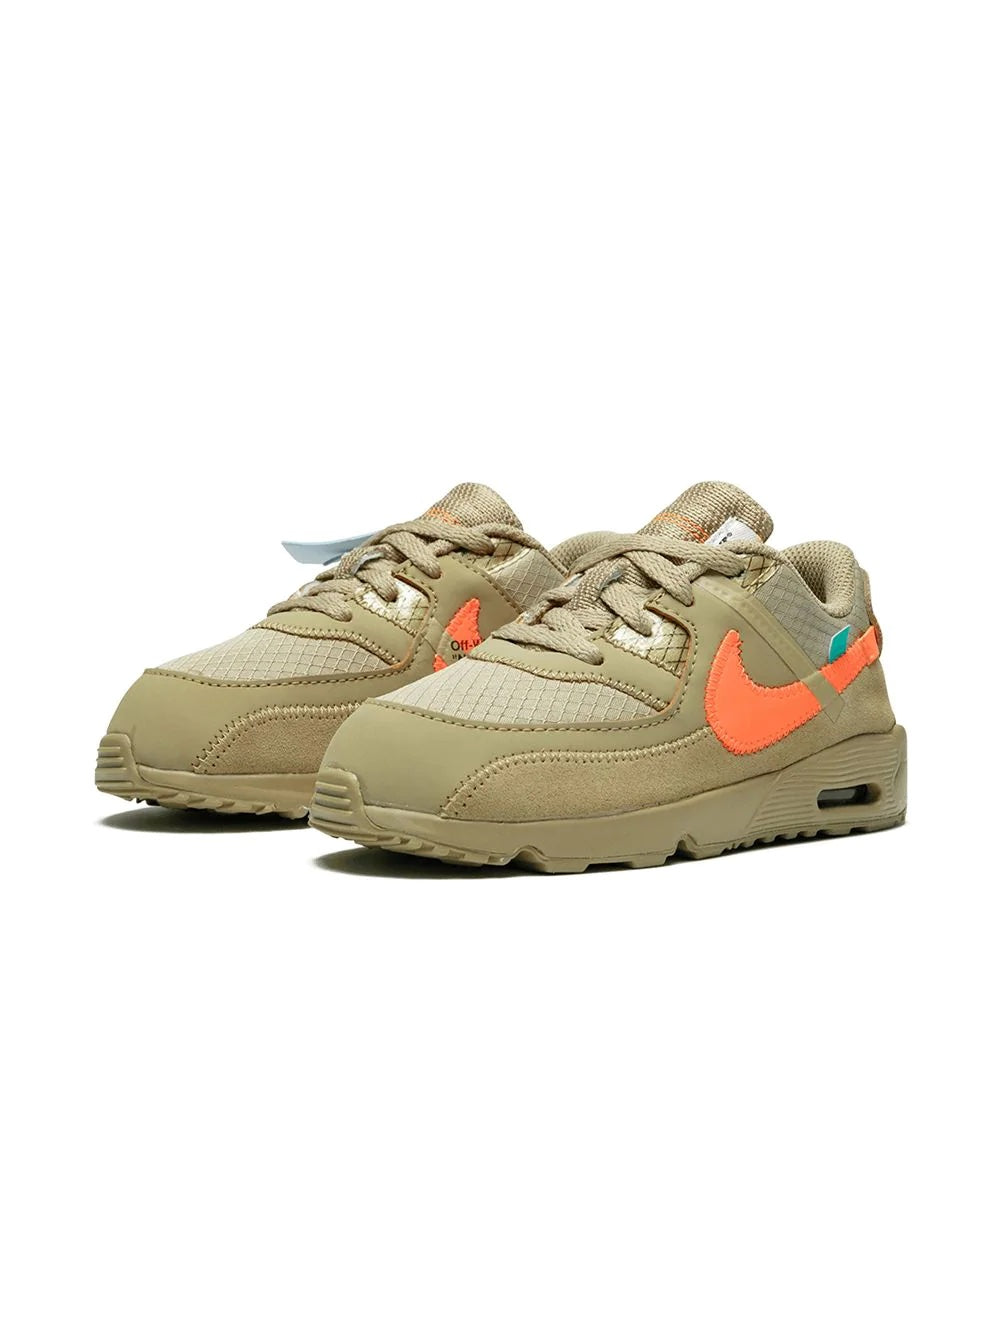 Nike Air Max 90 x Off-White Kids 'Desert Ore' front view